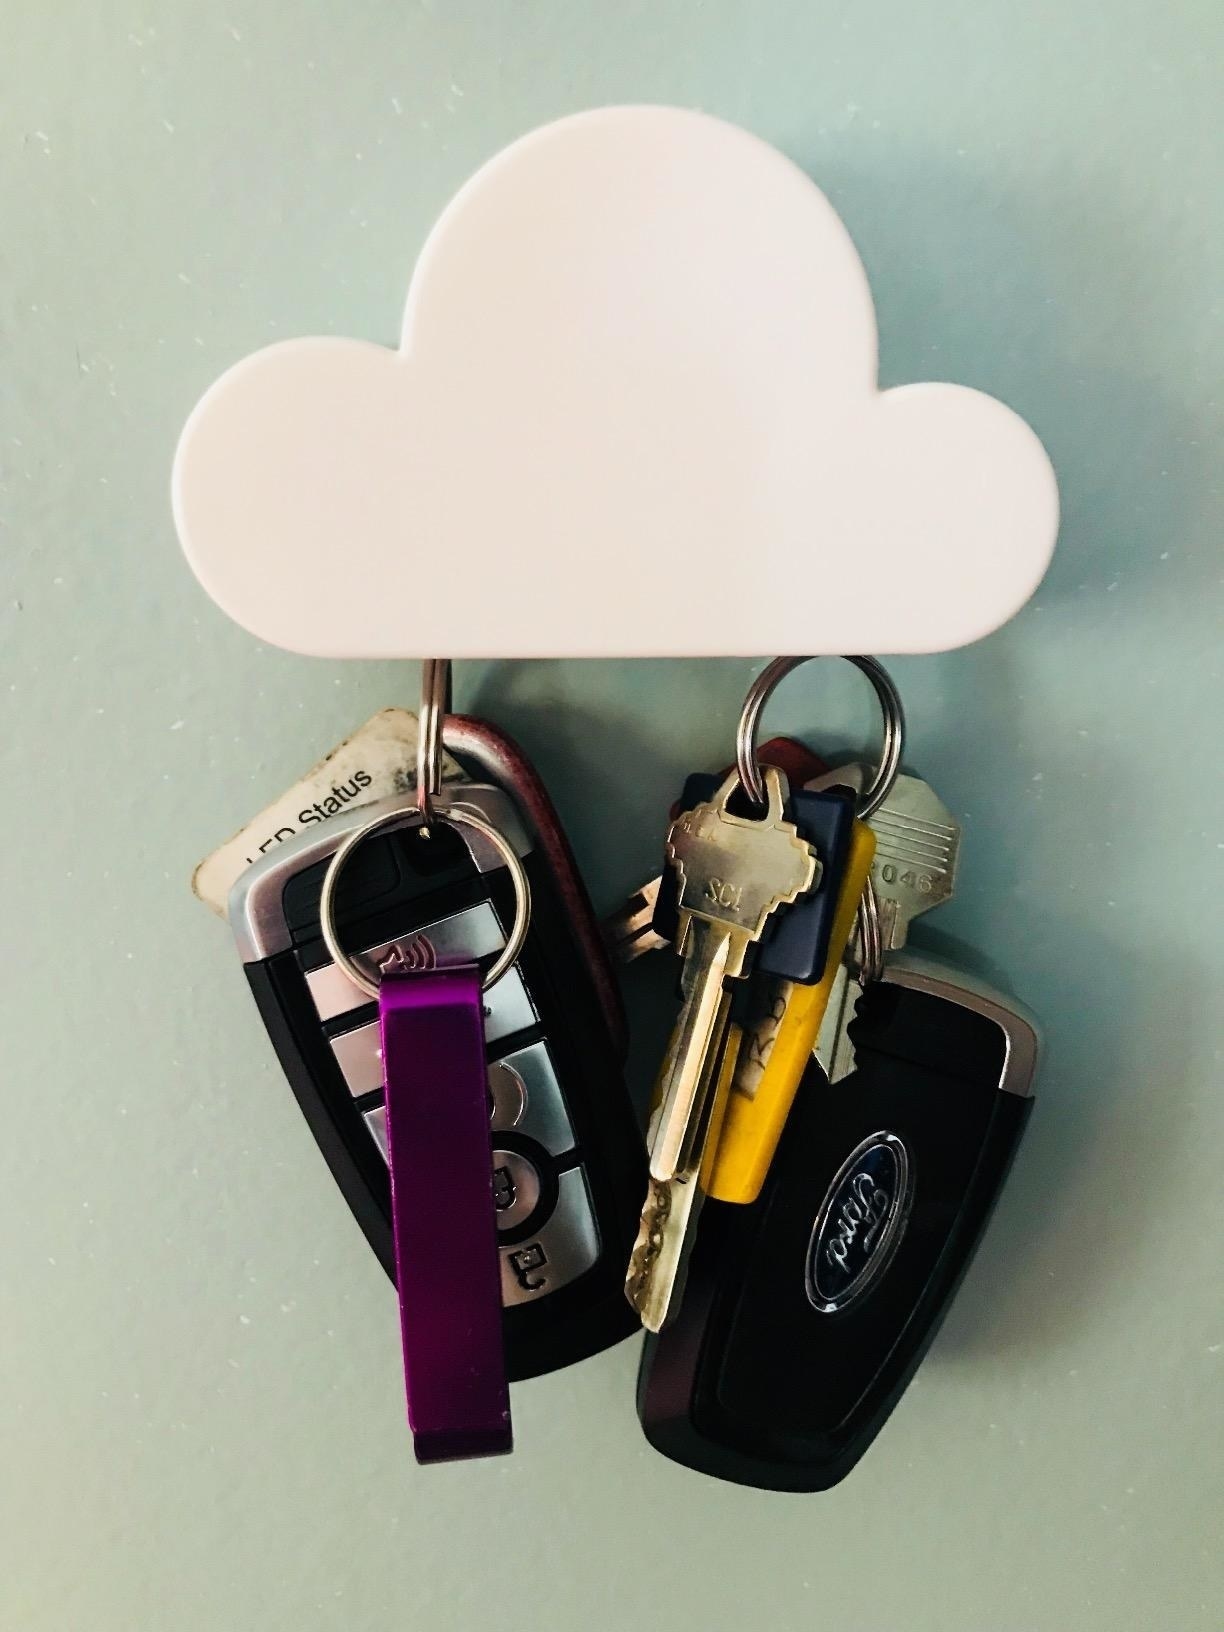 Two sets of keys hanging from the cloud-shaped magnetic key holder